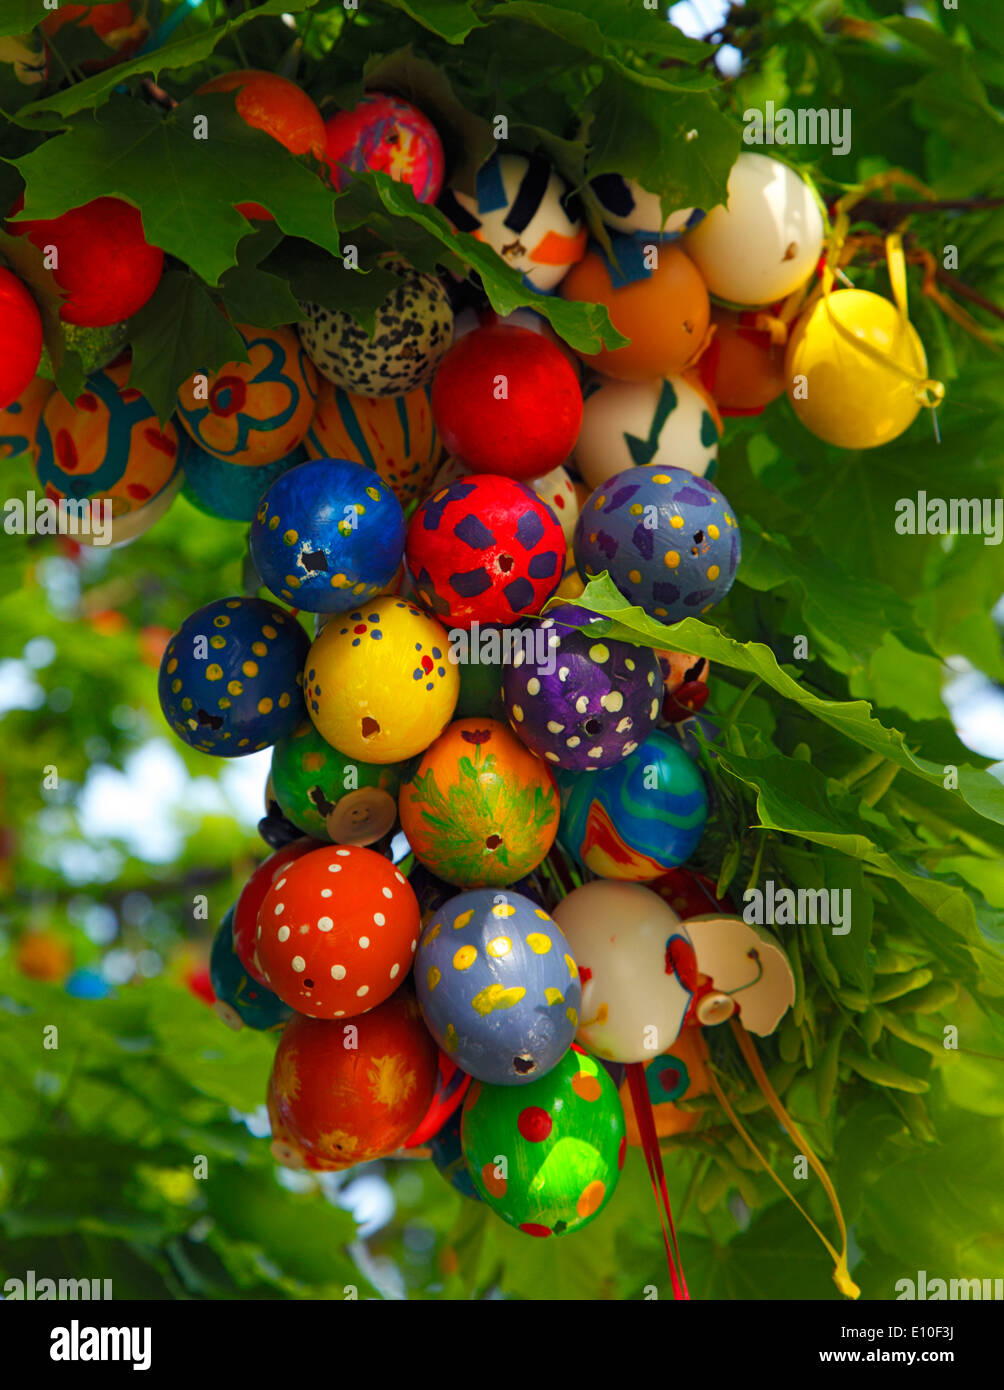 festive season, annual festivals, Easter, Easter customs, painted eggs at a tree in the castle gardens of the residence castle of Ludwigsburg in Baden-Wuerttemberg Stock Photo